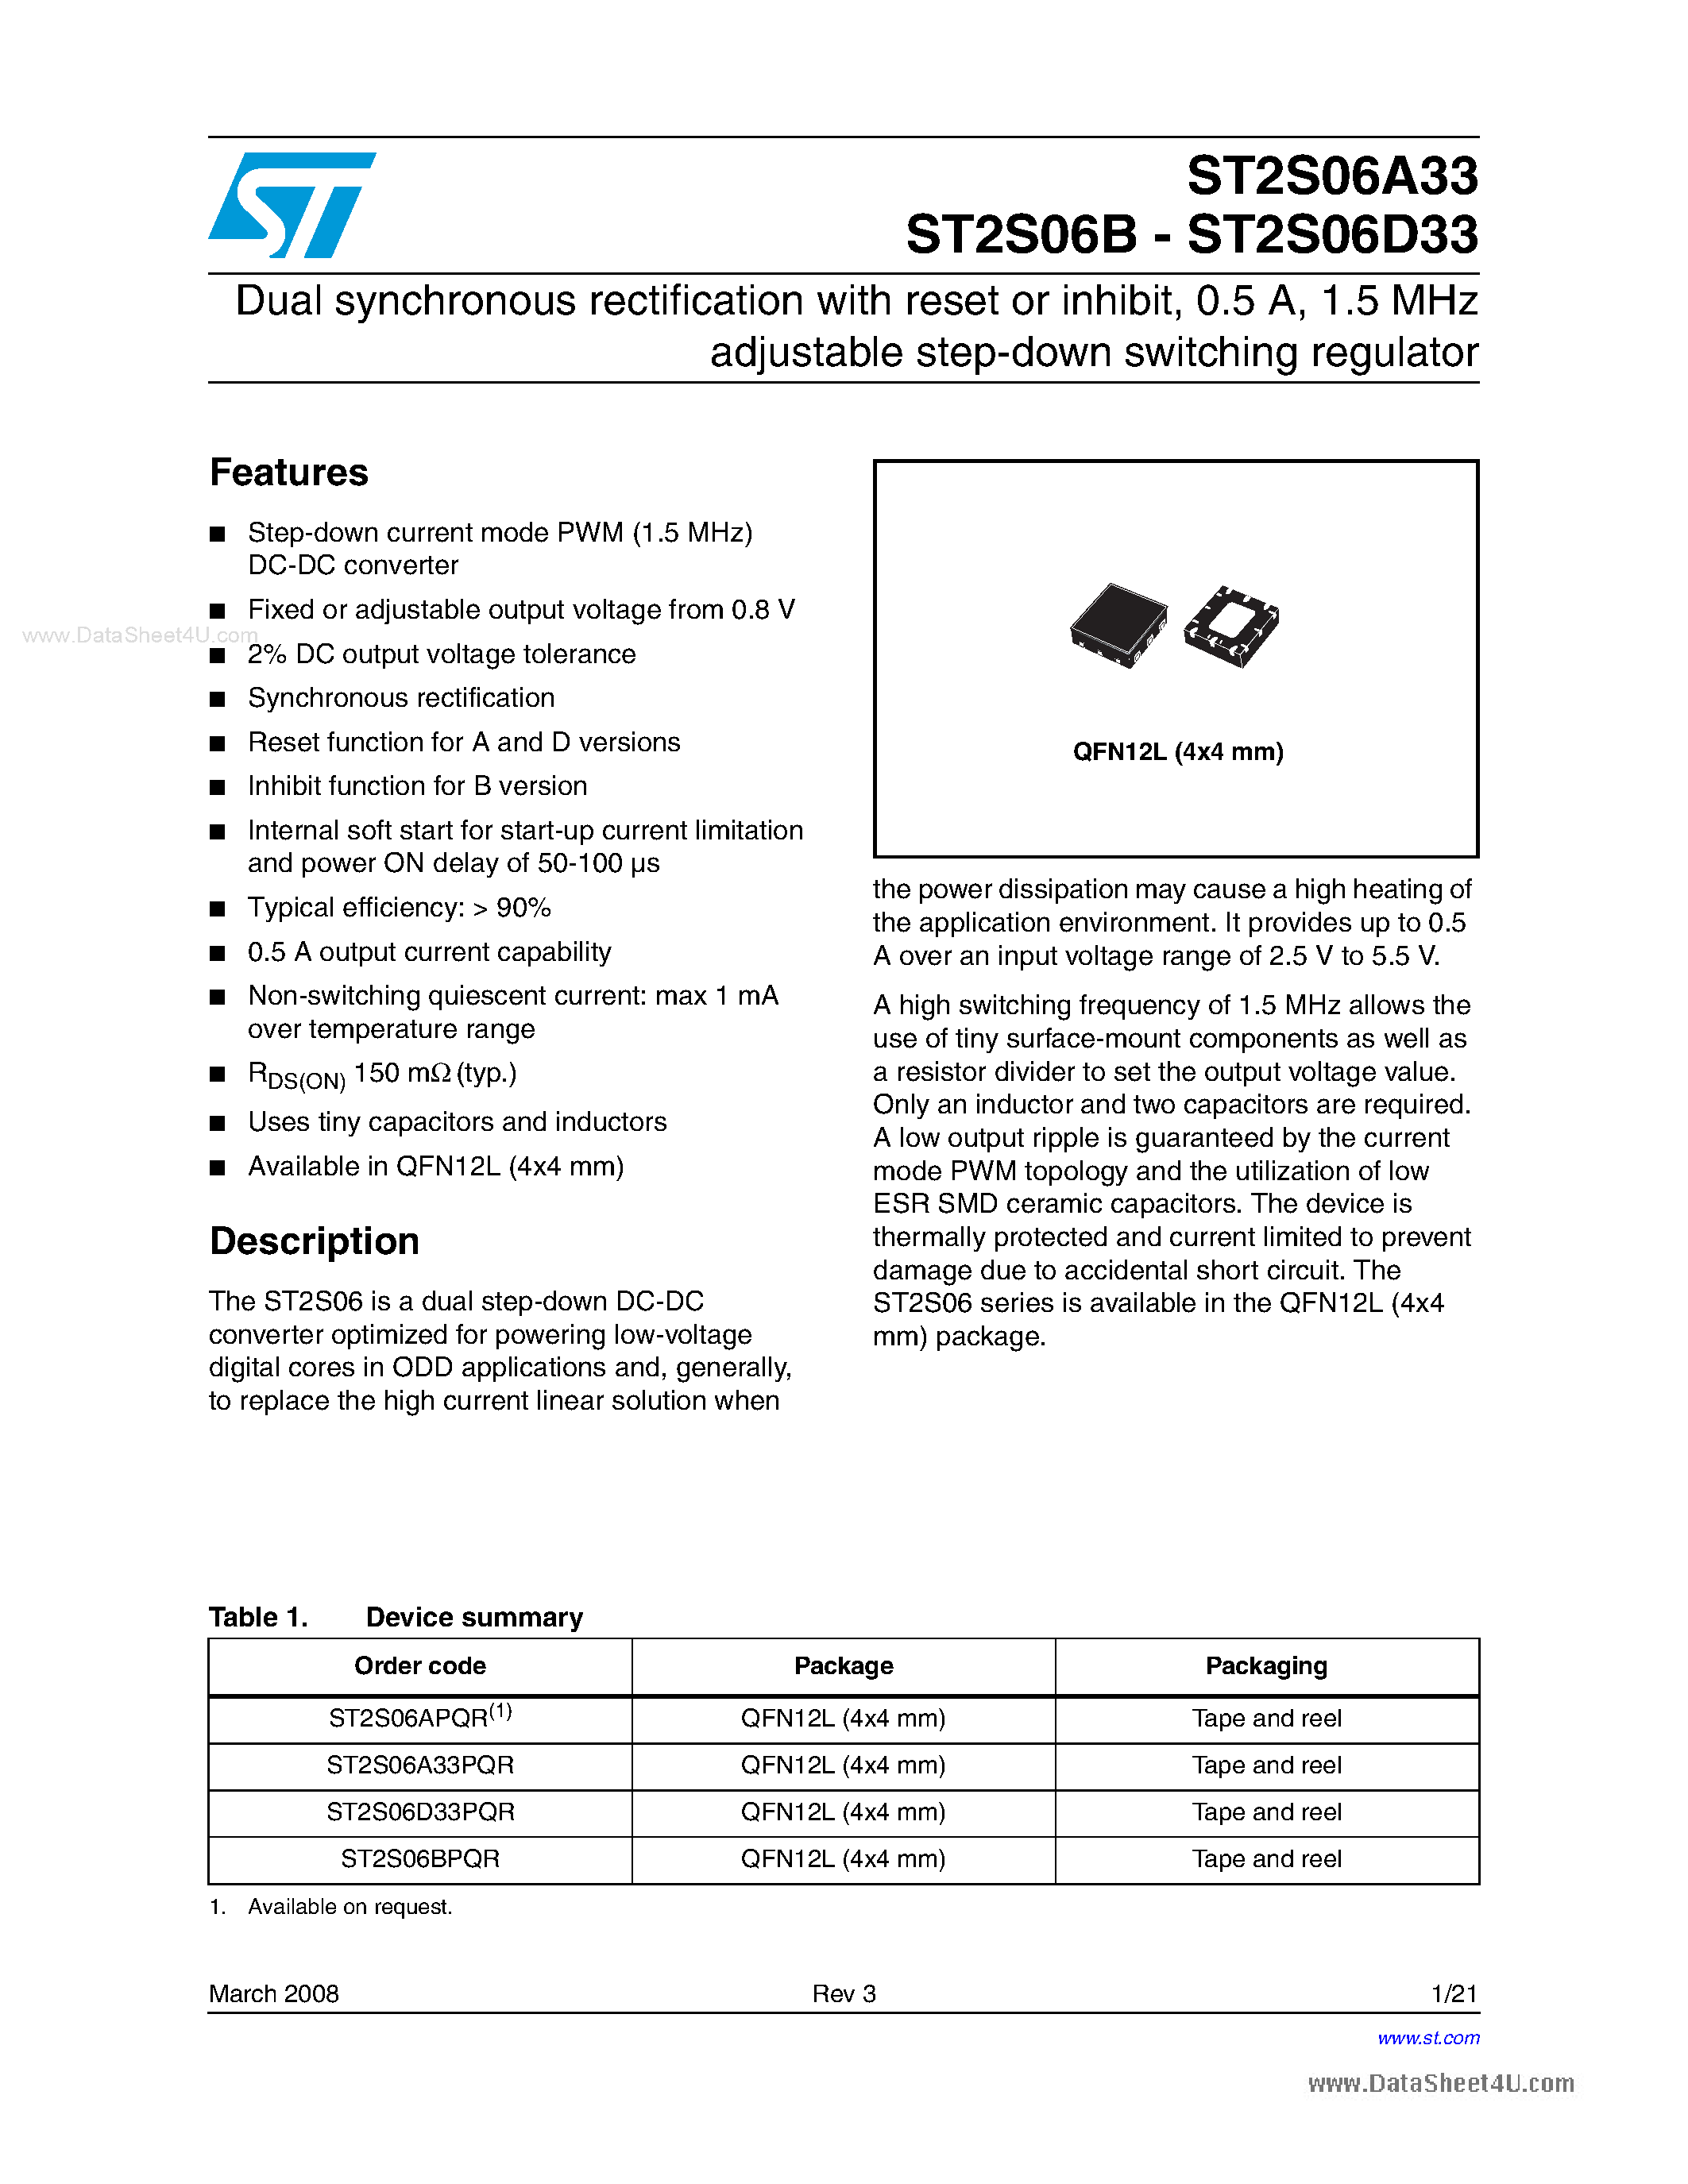 Datasheet ST2S06A33 - (ST2S06xxx) Dual synchronous rectification page 1